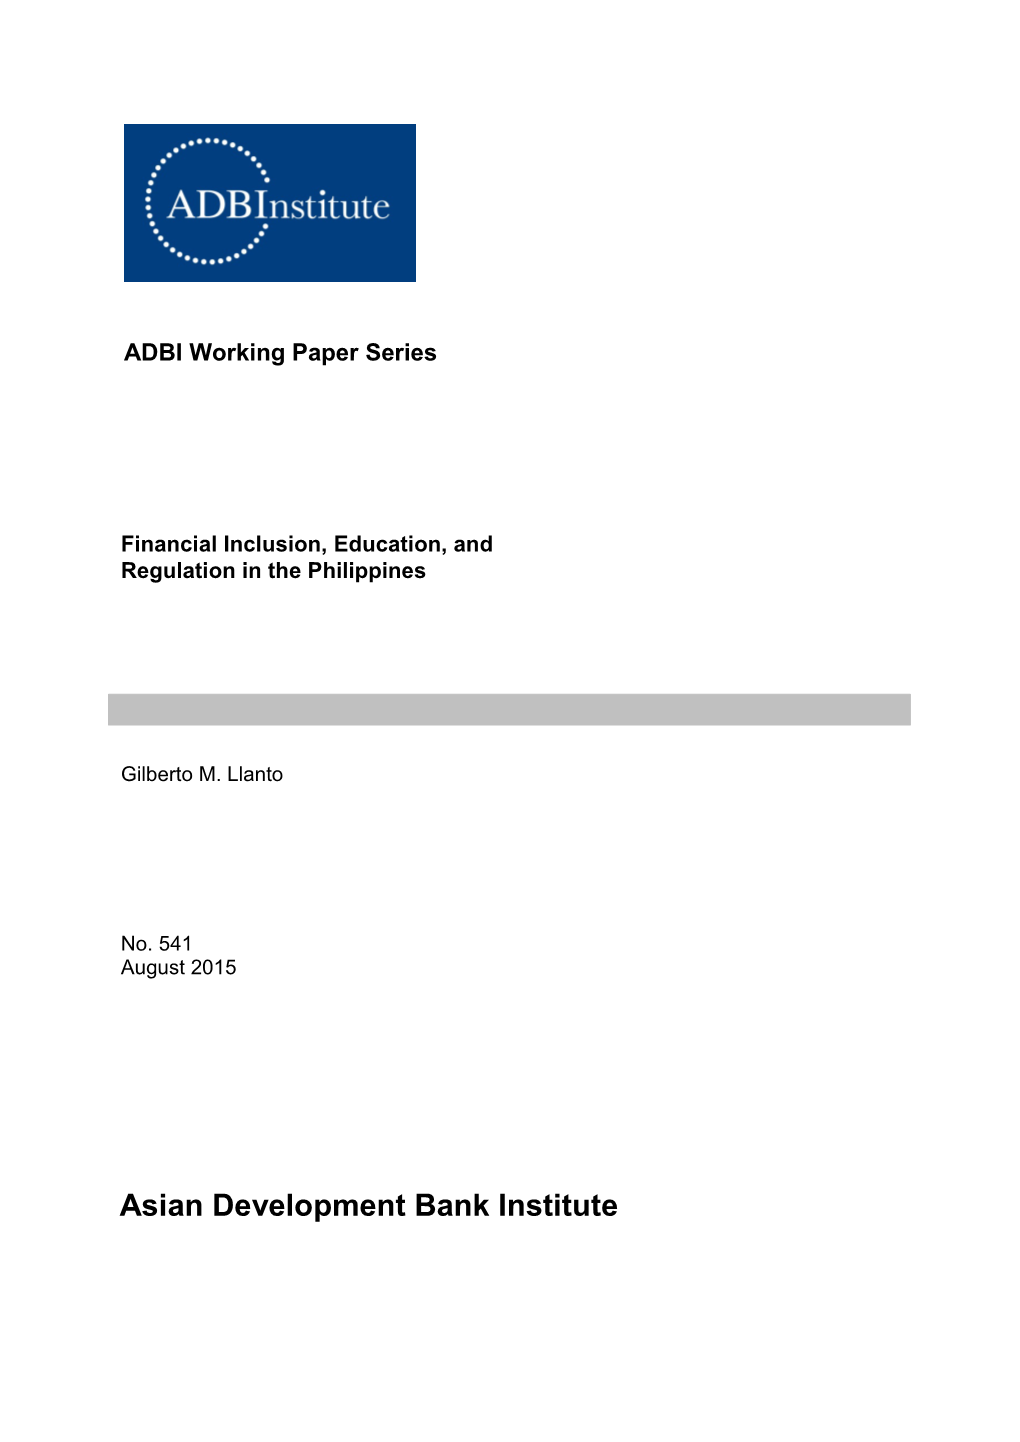 Financial Inclusion, Education, and Regulation in the Philippines